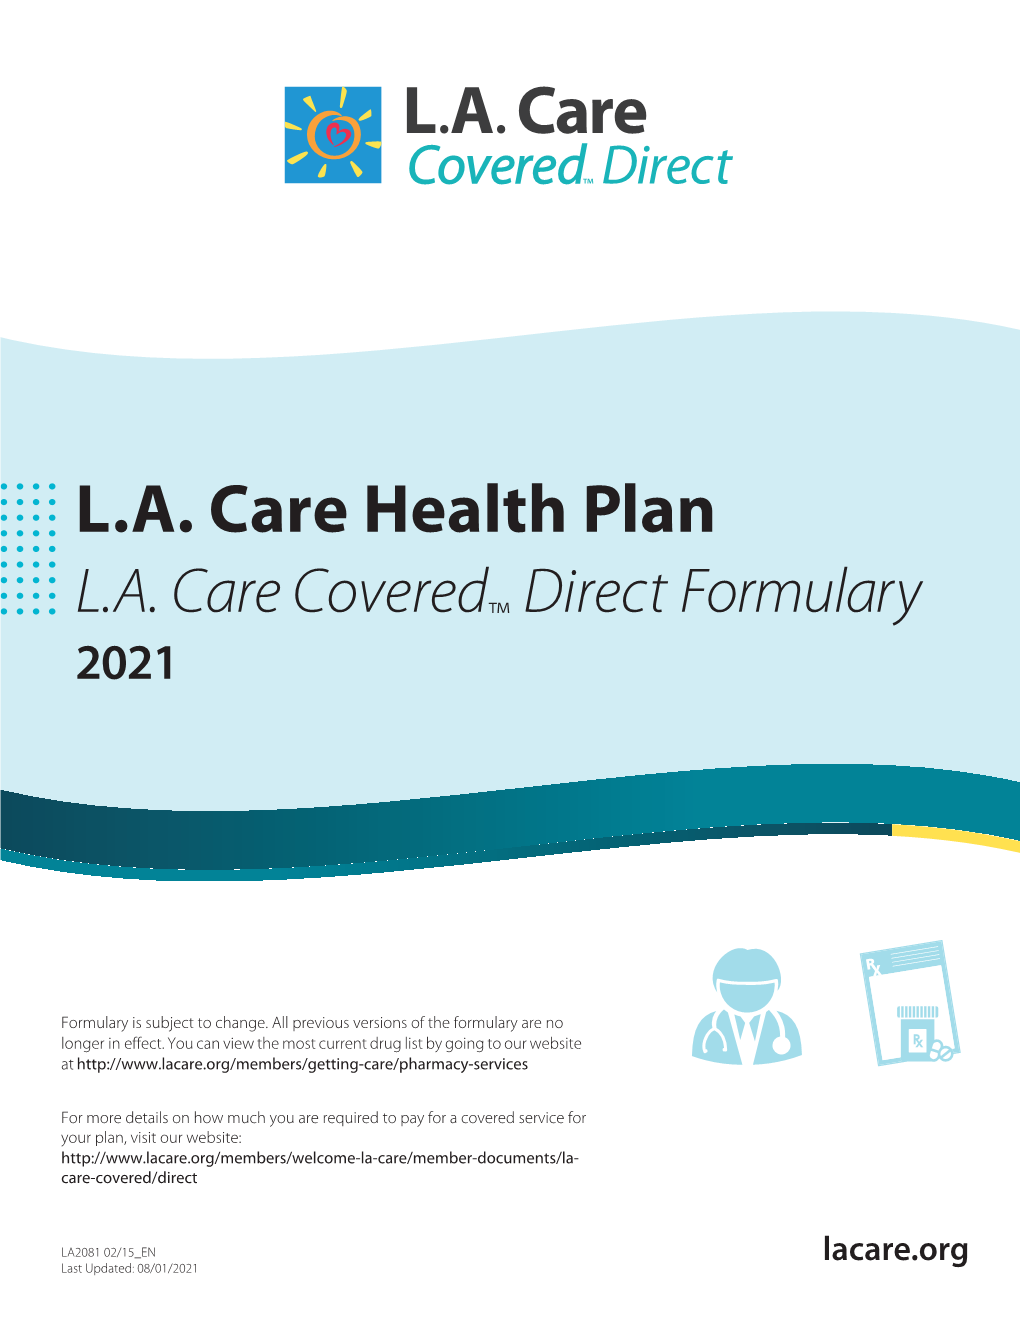 L.A. Care Covered Direct Formulary